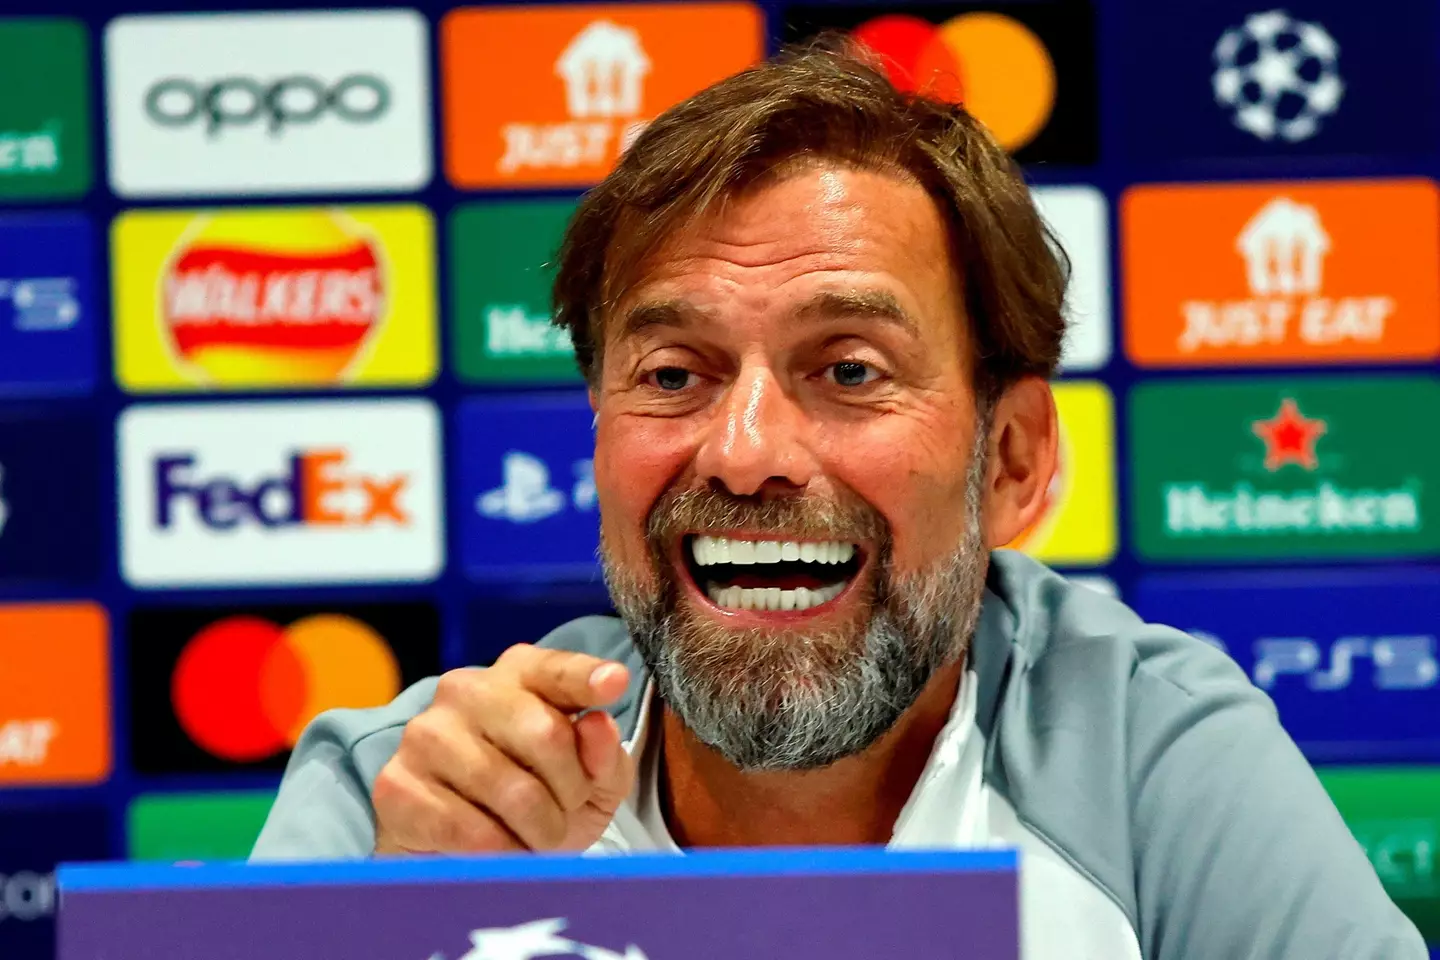 Klopp was not impressed with the idea. Image: Alamy